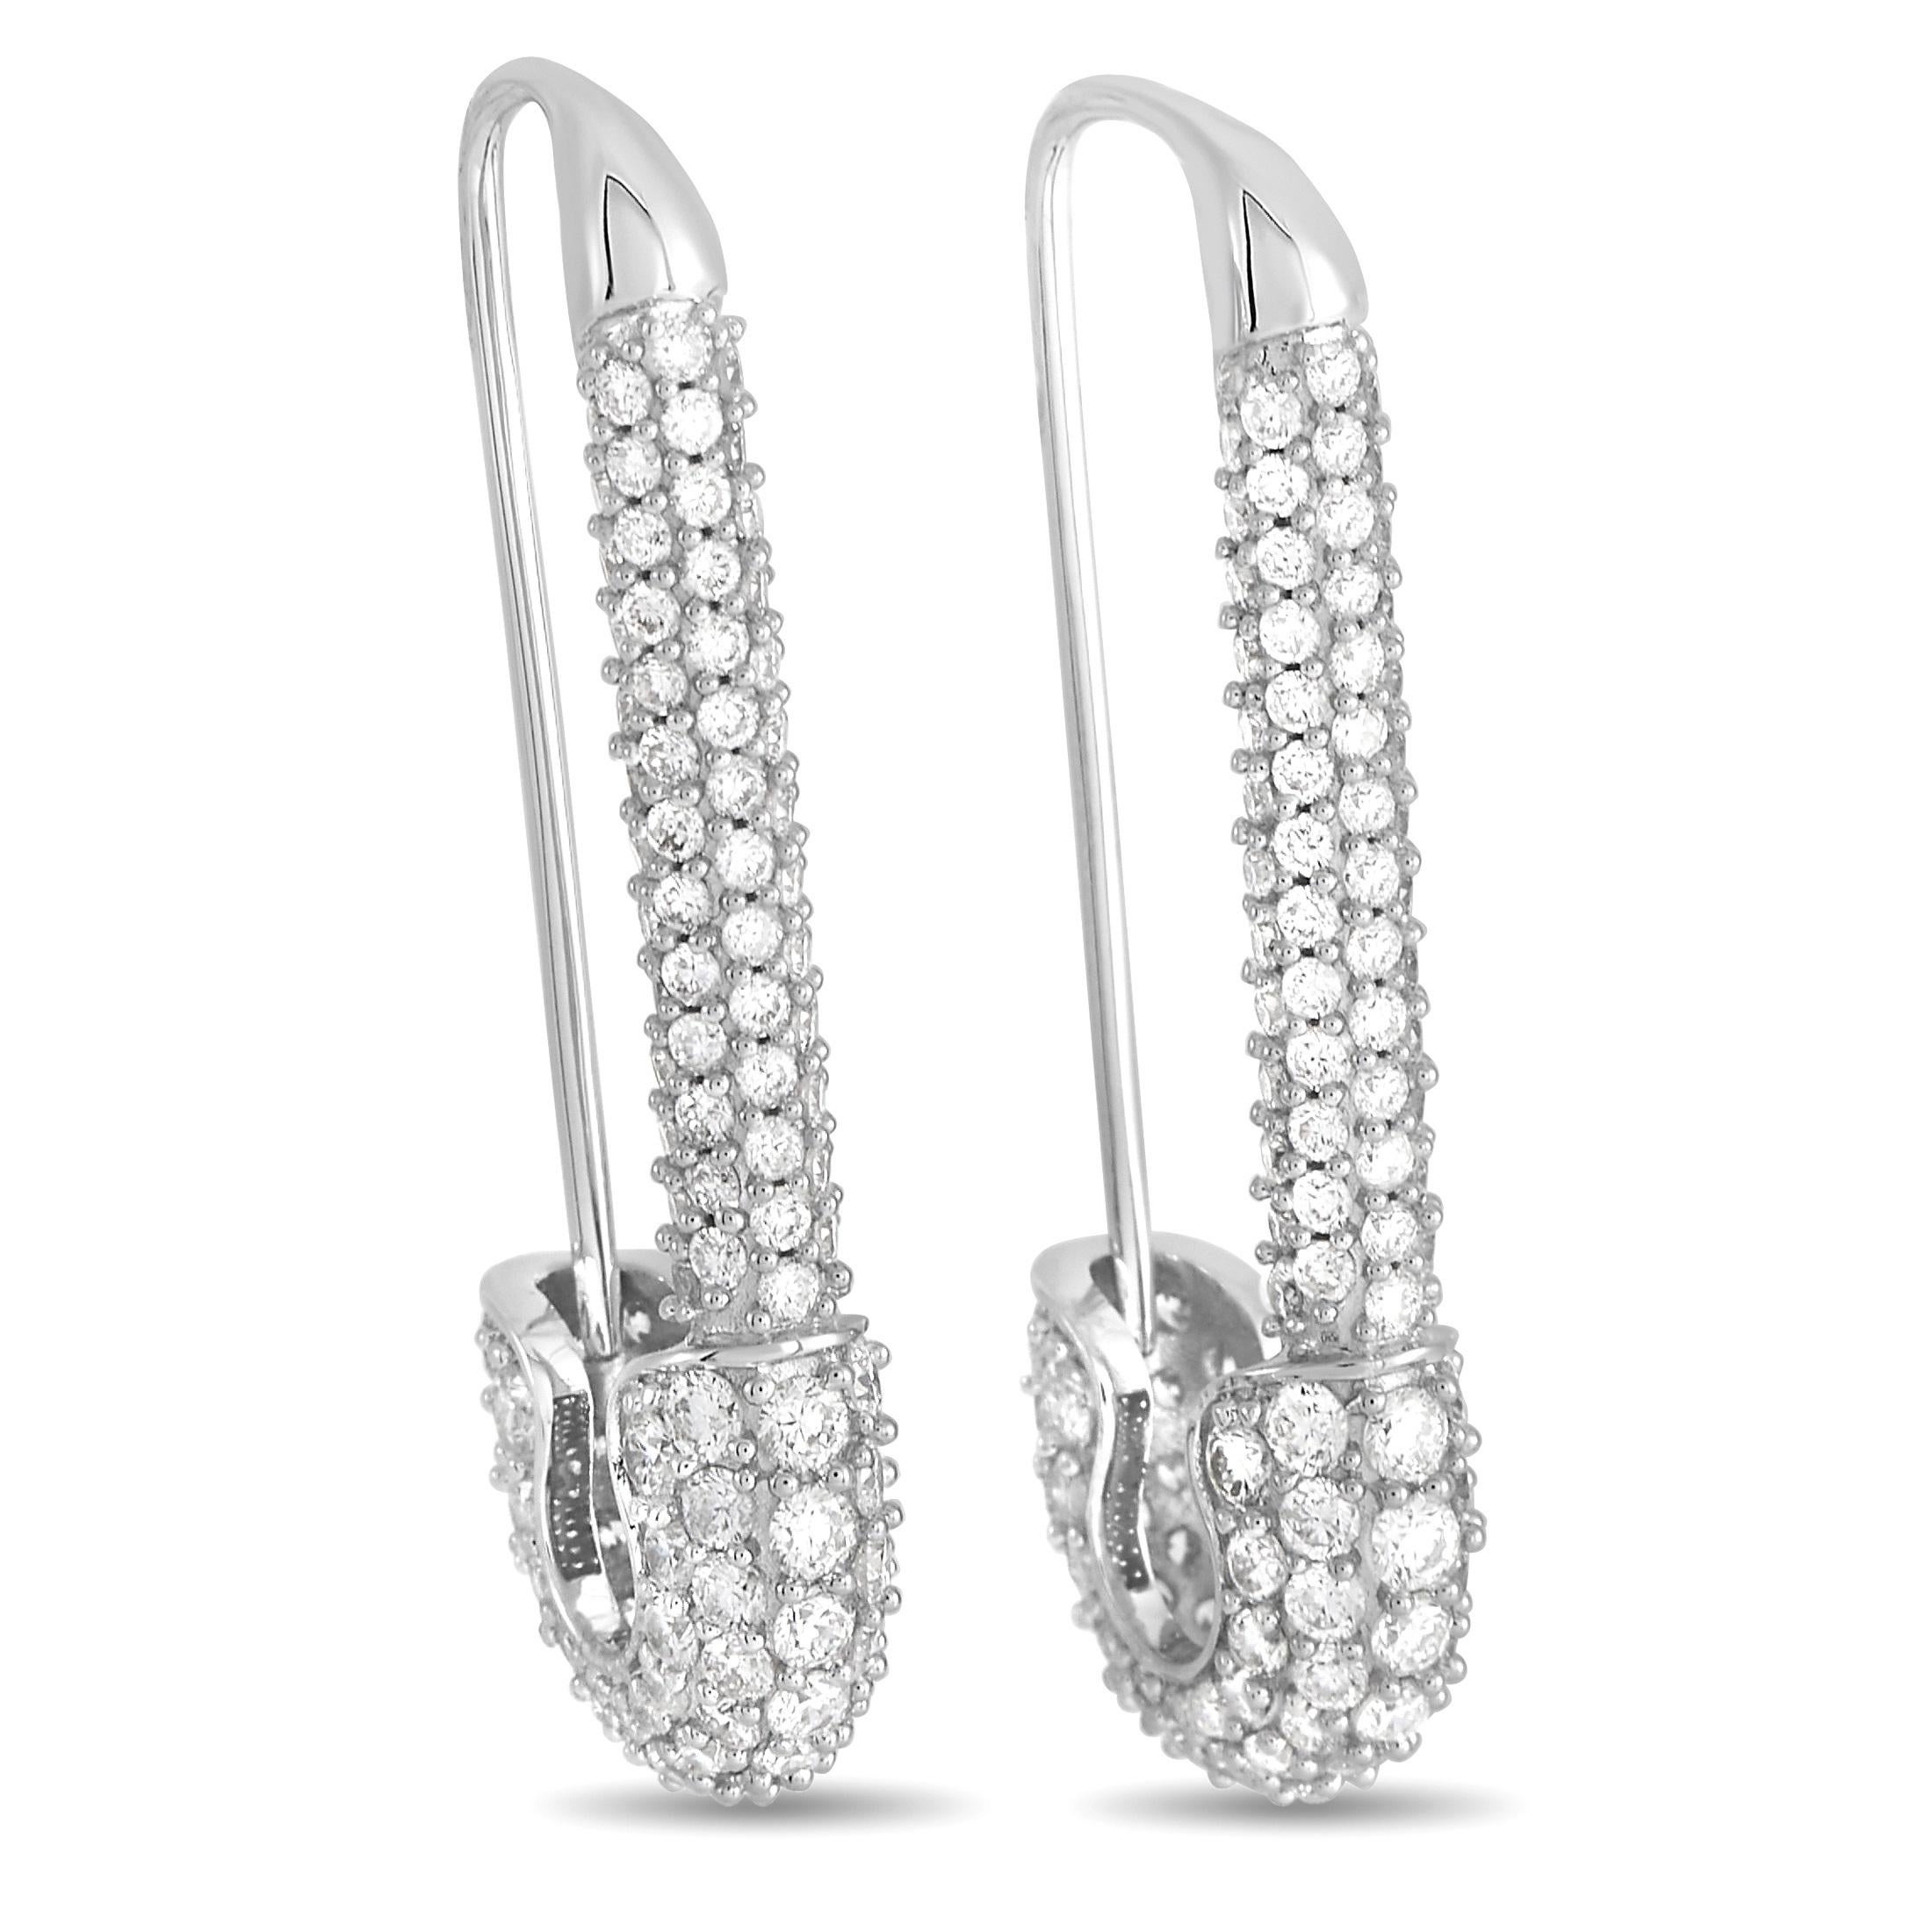 These luxury earrings will always earn a second look. Crafted from 18K White Gold to look like safety pins, their charming setting measures 1.37” long and 0.55” wide. Uniquely elegant, diamonds totaling 3.25 carats make them even more exceptional. 
